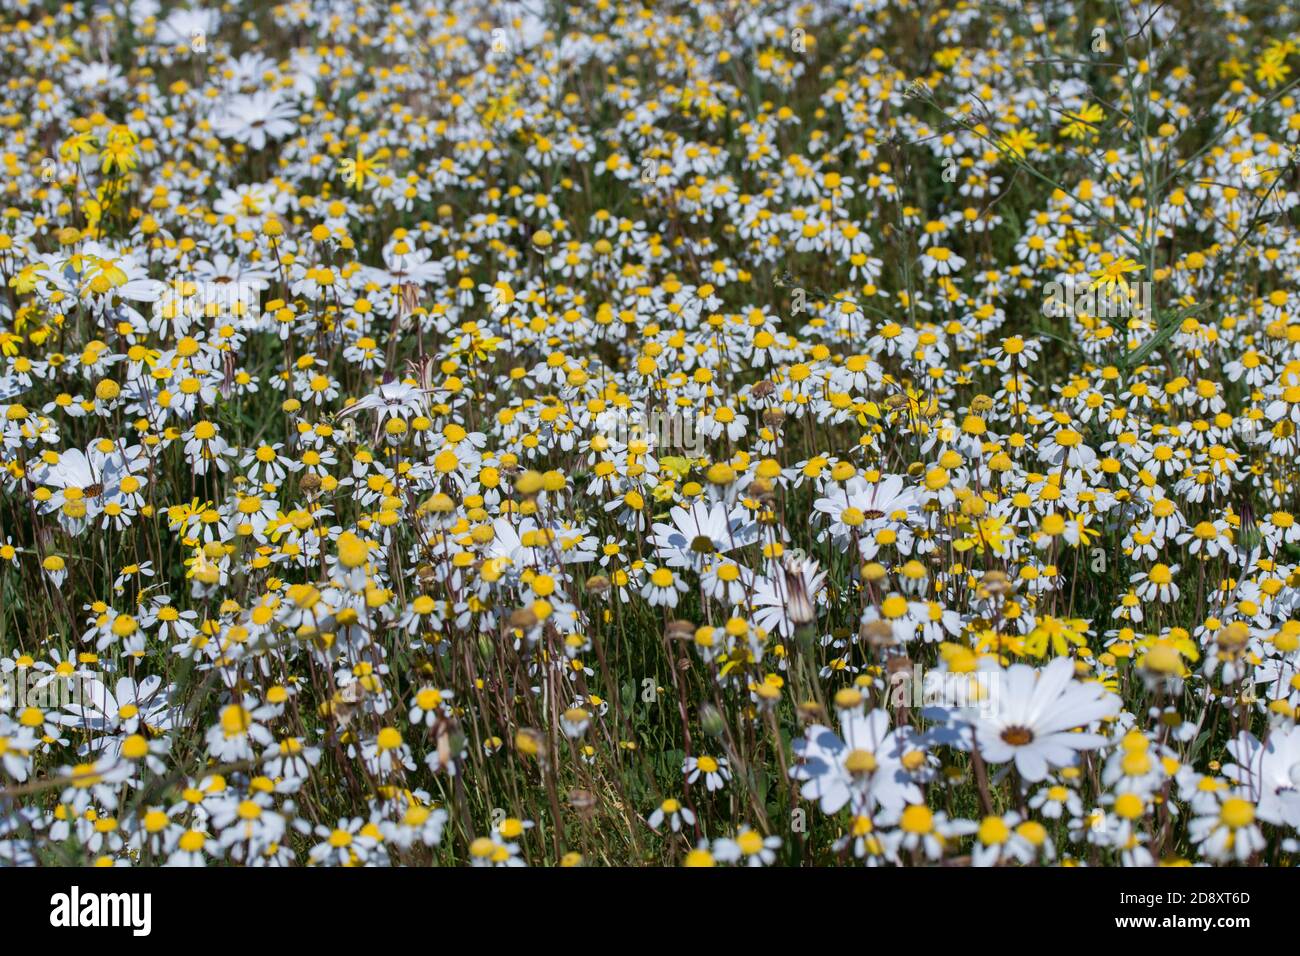 A field of flowers, a mix of water buttons (Cotula) and white daisies (dimorphotheca) Stock Photo